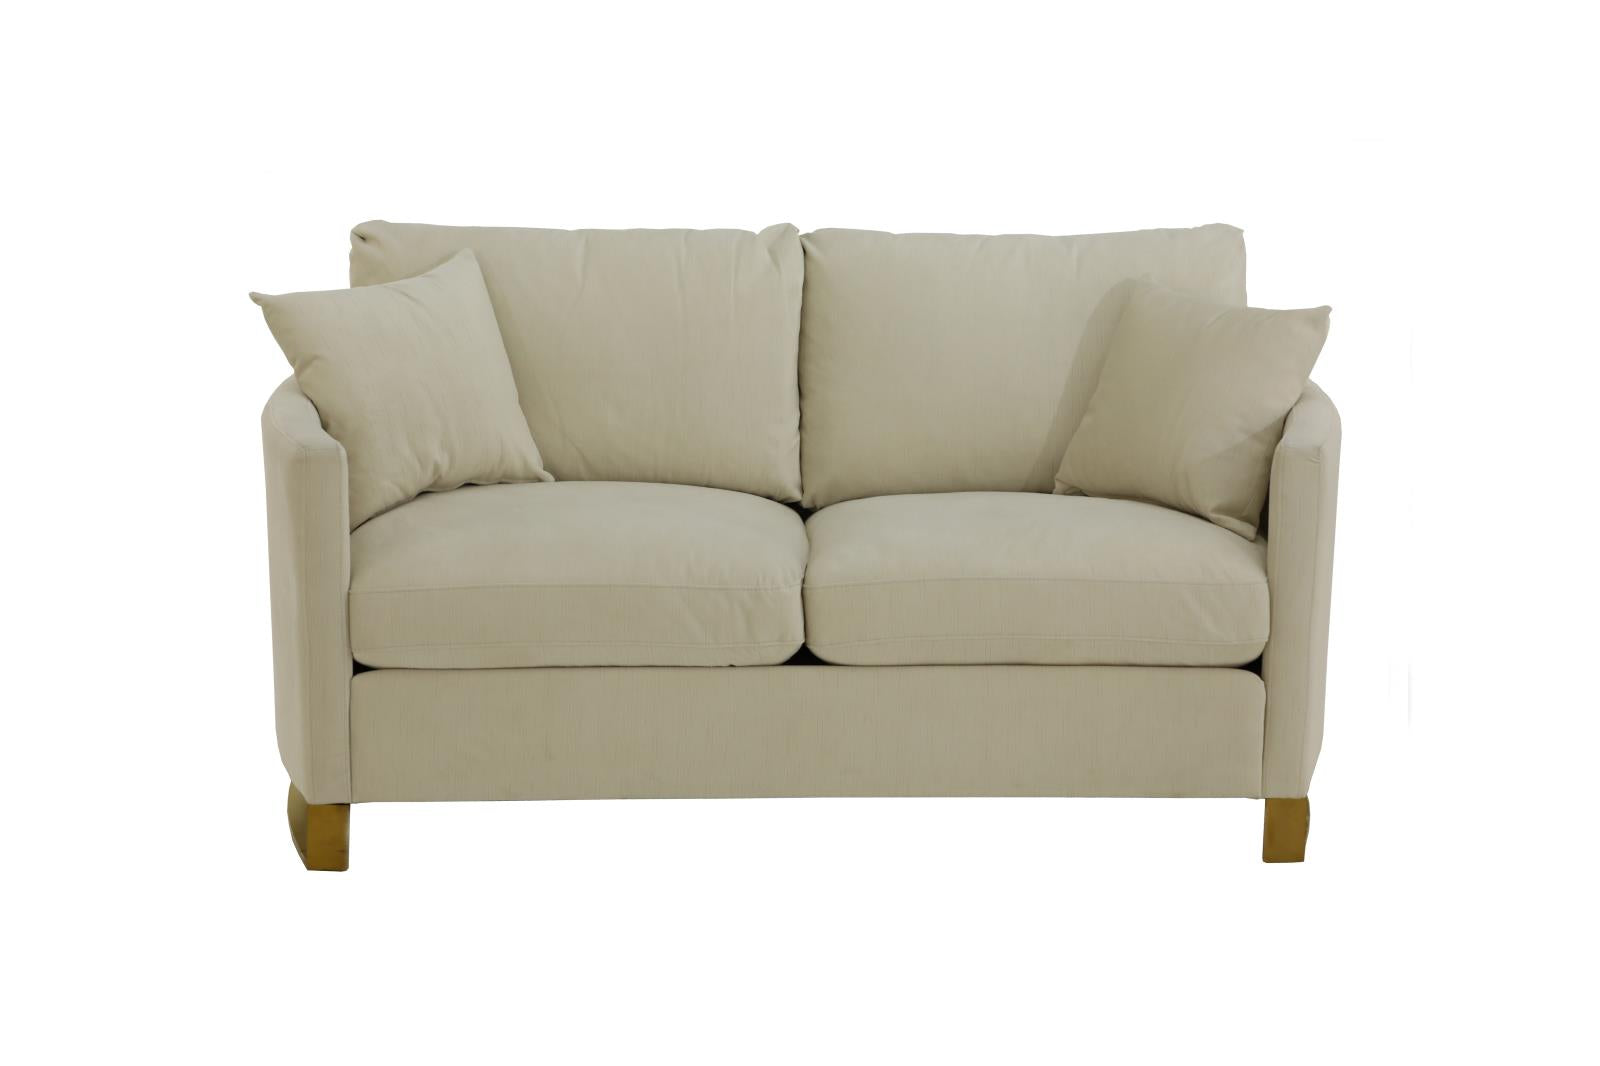 Corliss Upholstered Arched Arms Loveseat Beige - What A Room